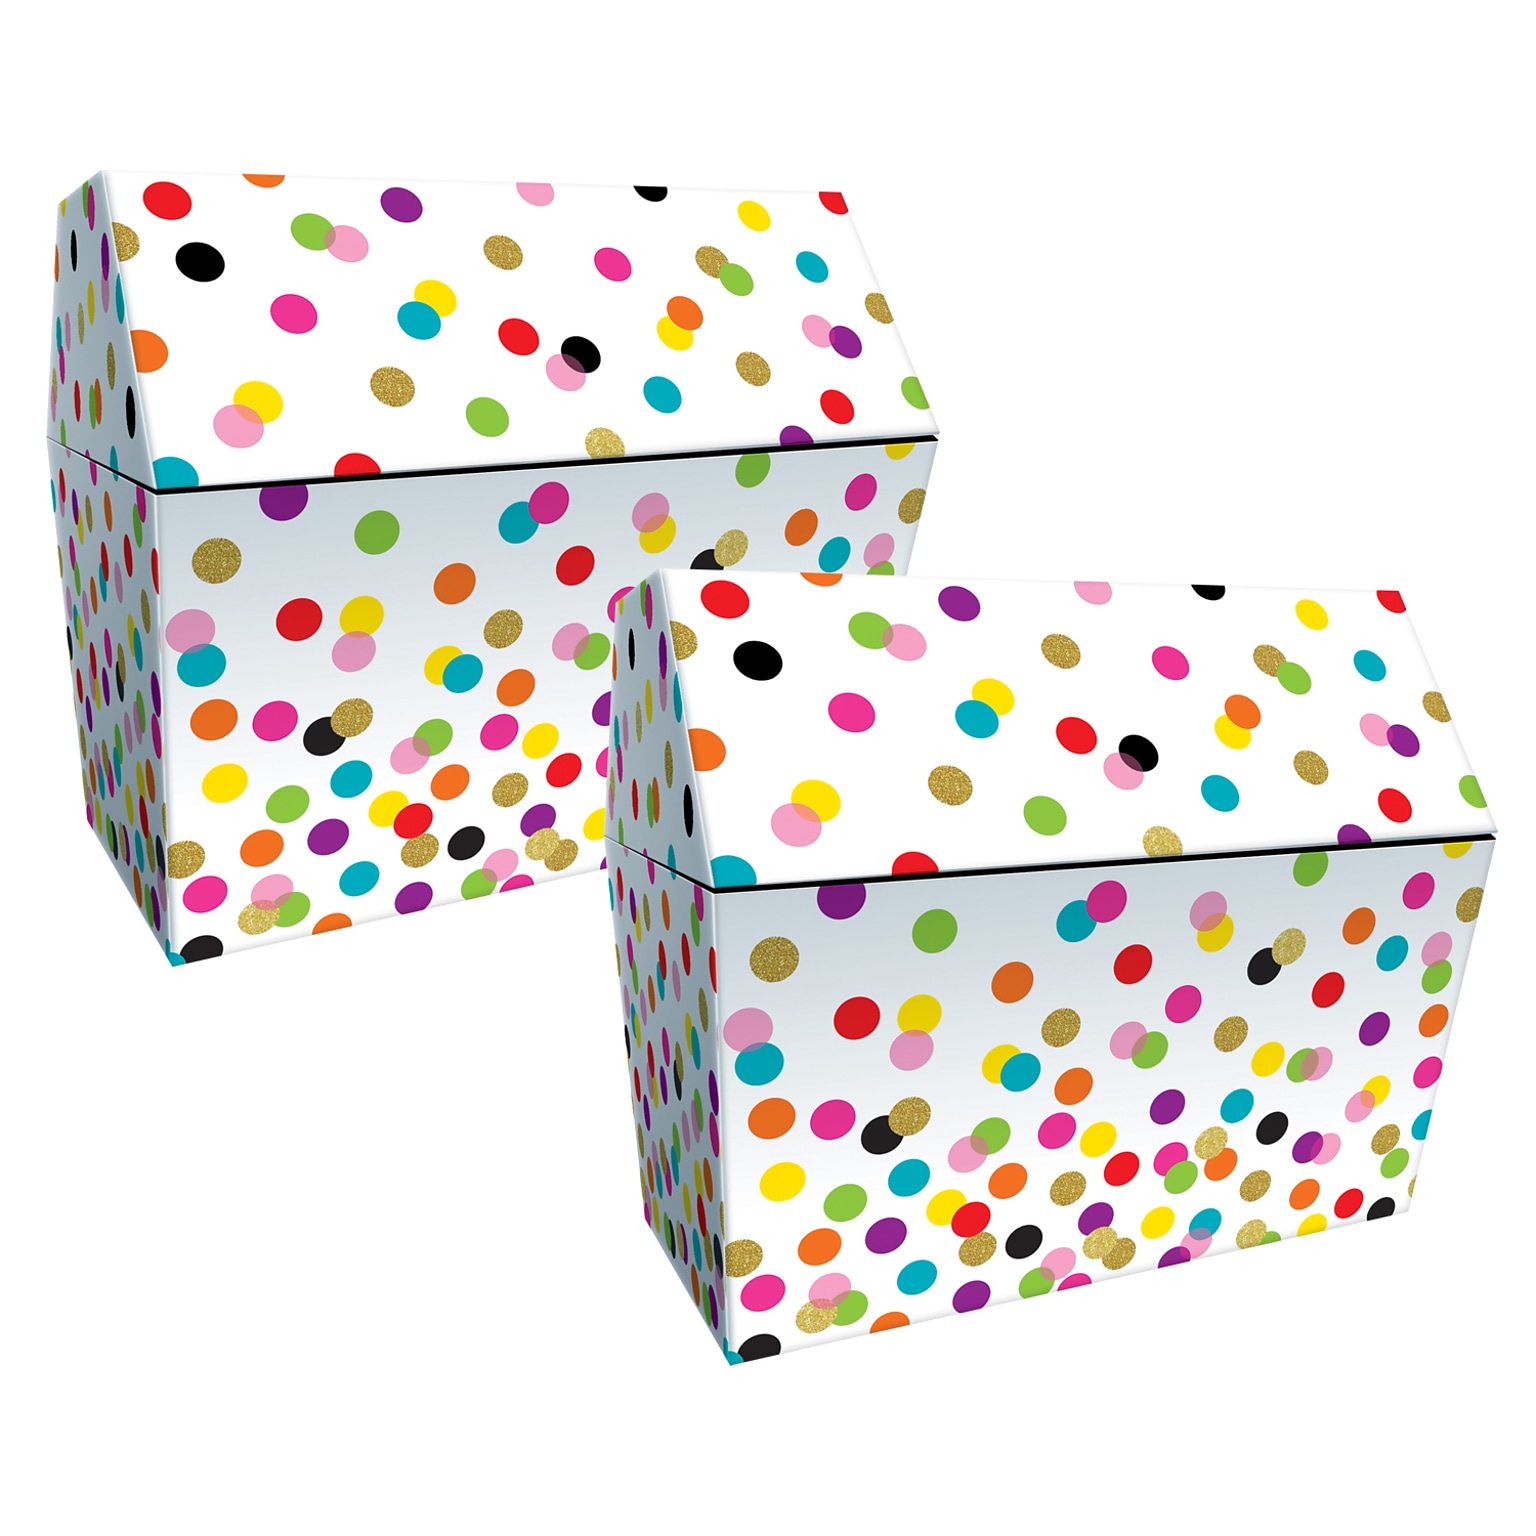 Teacher Created Resources® Confetti Chest, 9.5 x 8, Multicolored, Pack of 2 (TCR8589-2)